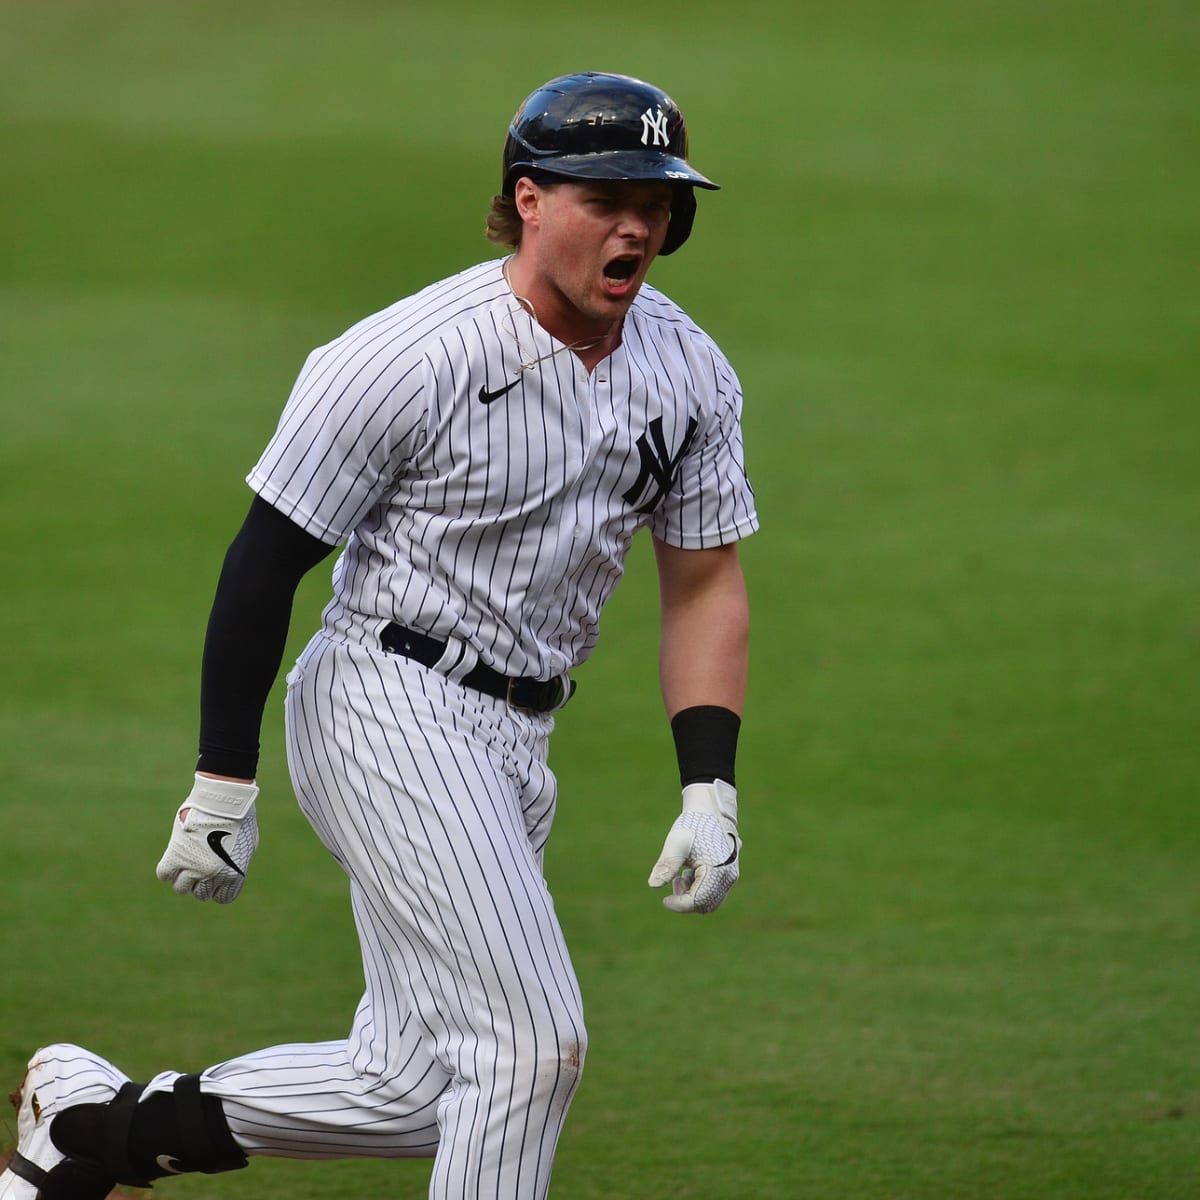 Why Luke Voit is lucky Yankees don't have chest hair policy 